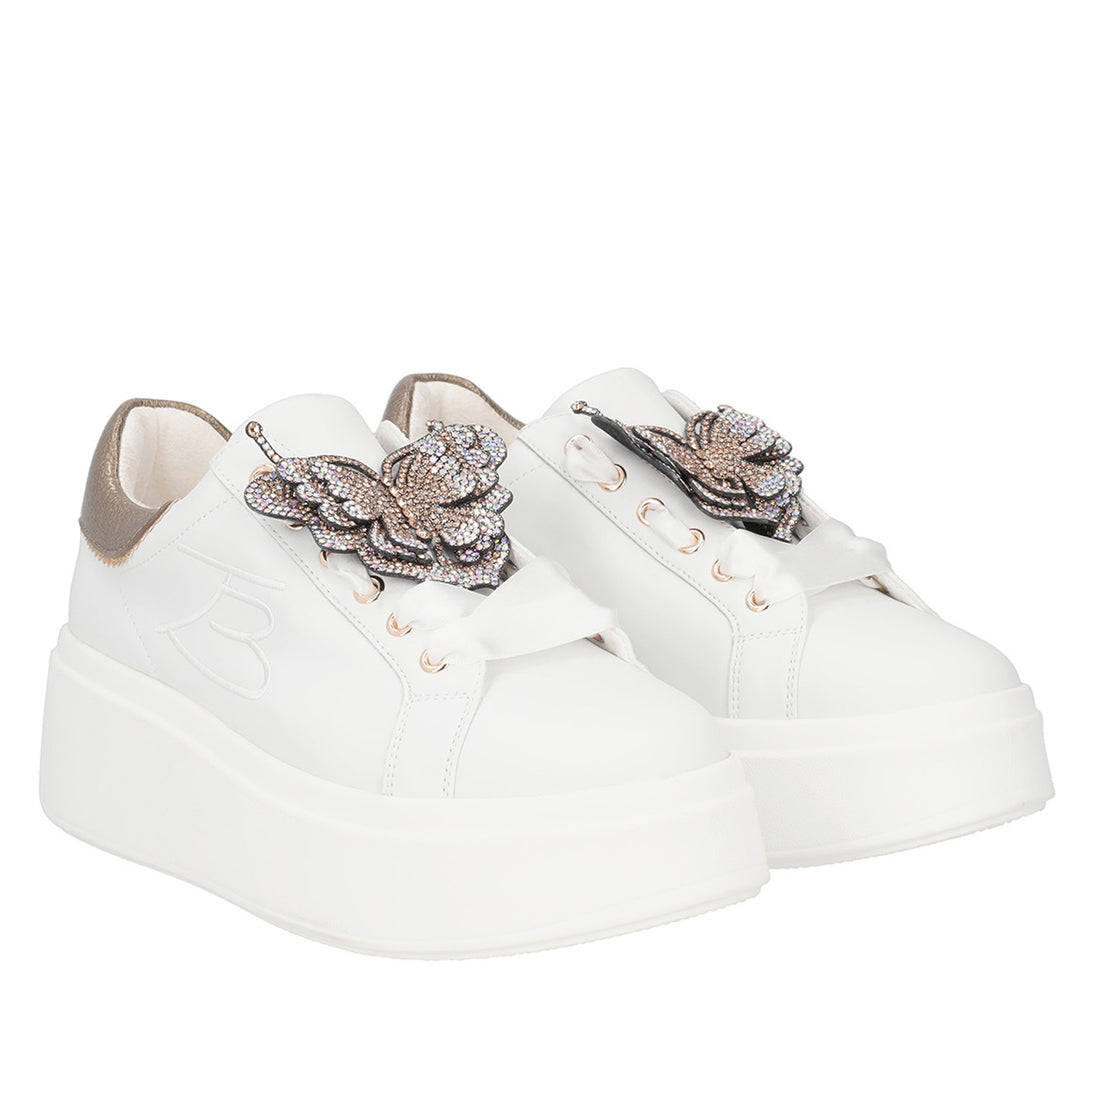 WHITE VANITY SNEAKER WITH JEWEL BUTTERFLY